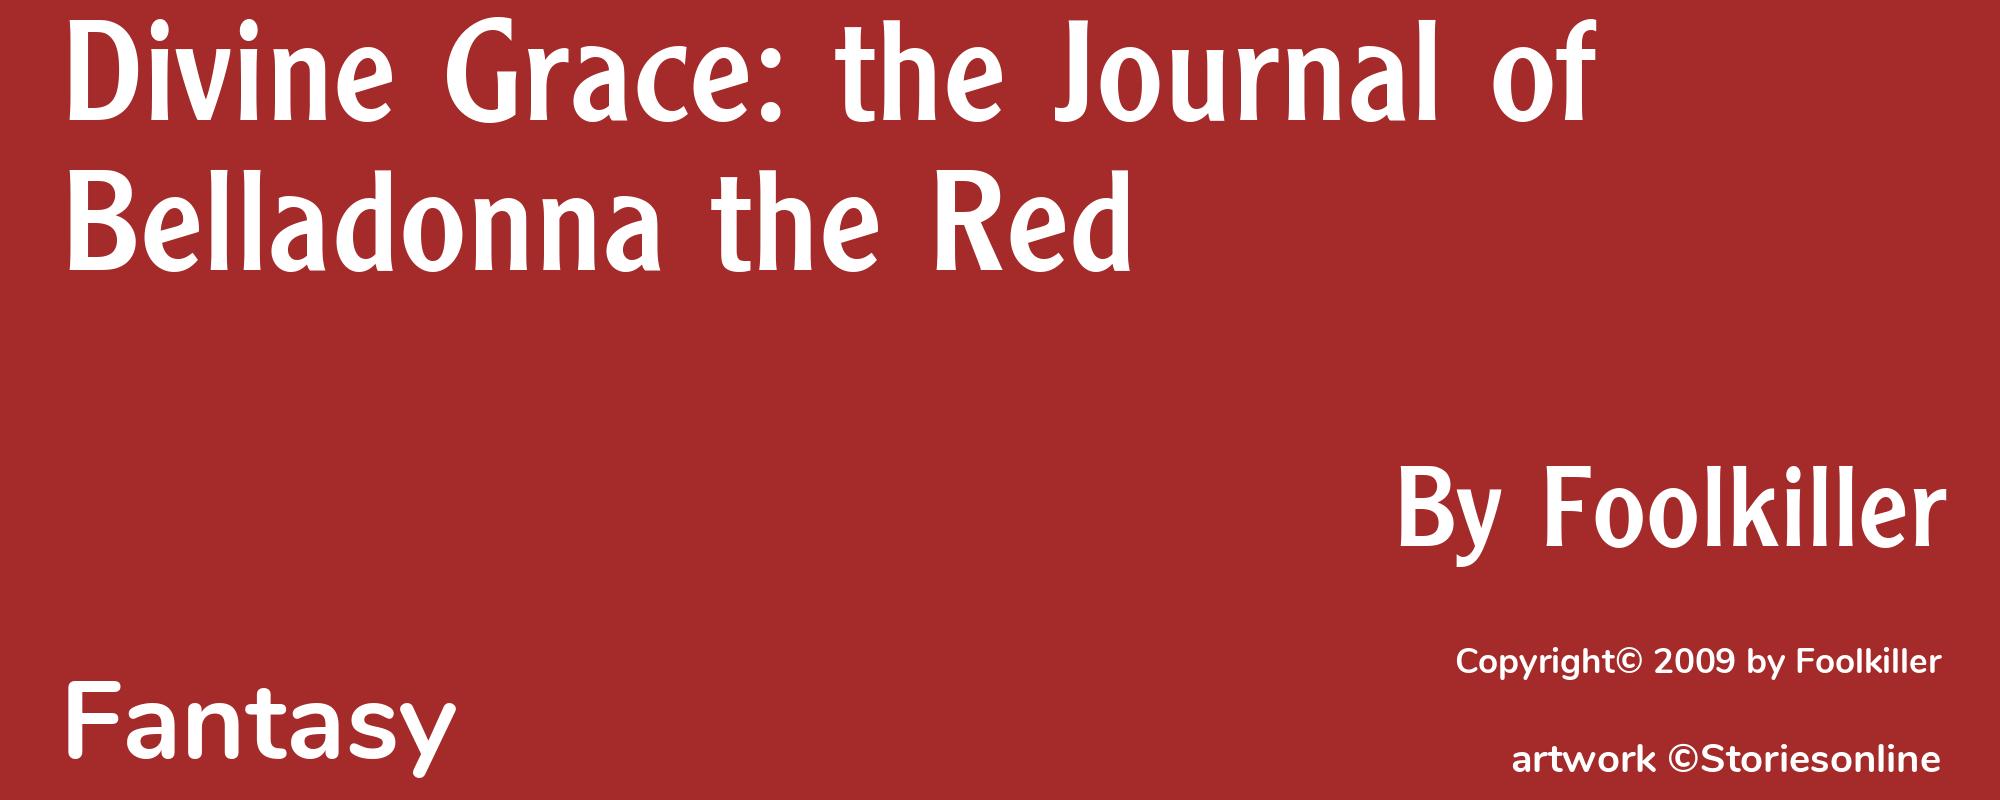 Divine Grace: the Journal of Belladonna the Red - Cover